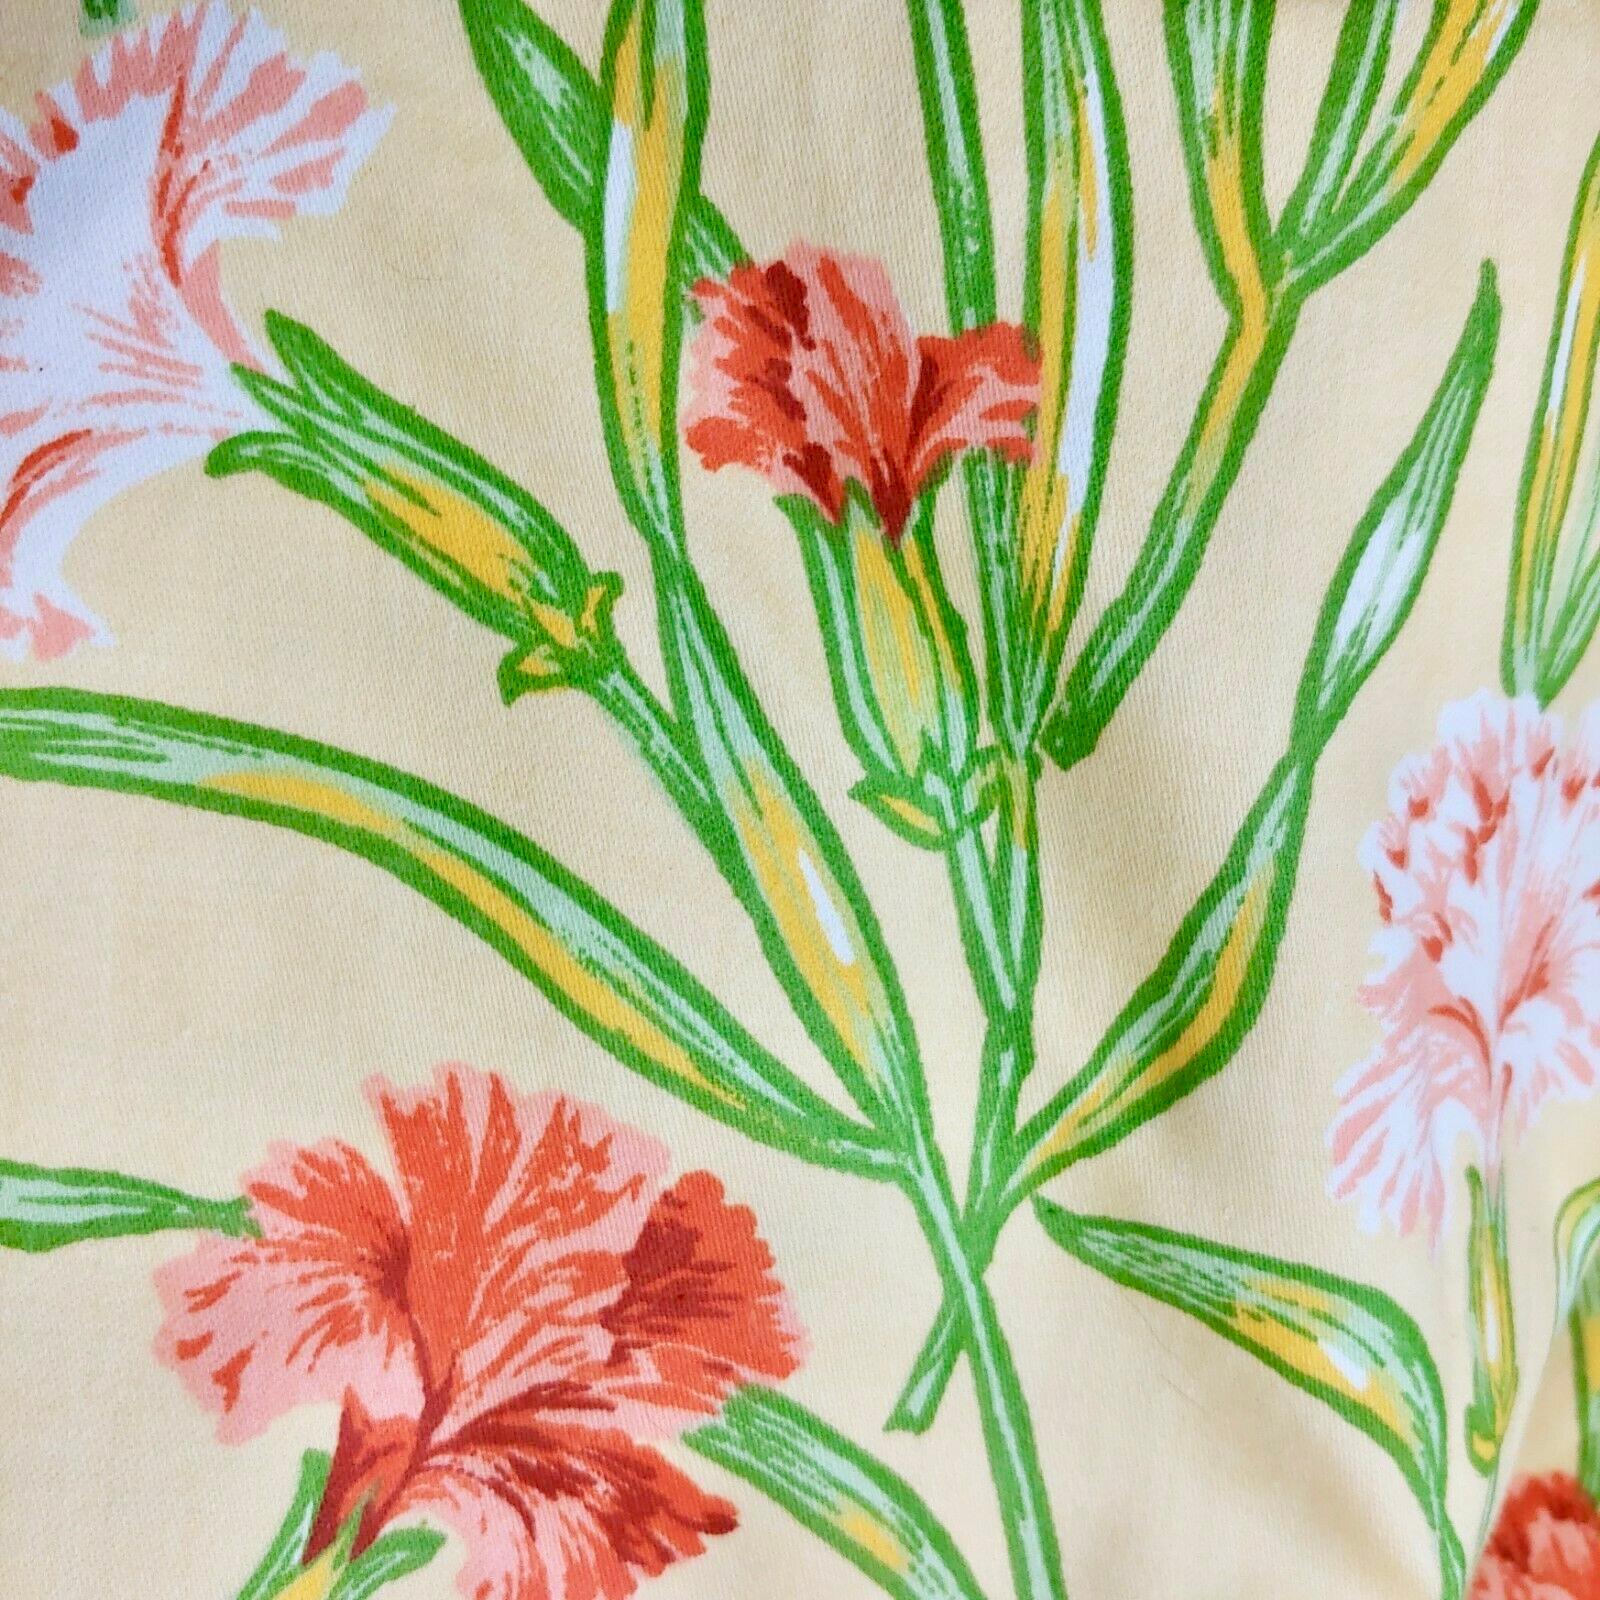 Vintage Schumacher Waverley carnations hand-printed cotton textile. Rare, gorgeous floral print. Pink and coral carnations in various states of bloom on gentle peach / yellow background. This listing is for a lot of 6 yards. 56